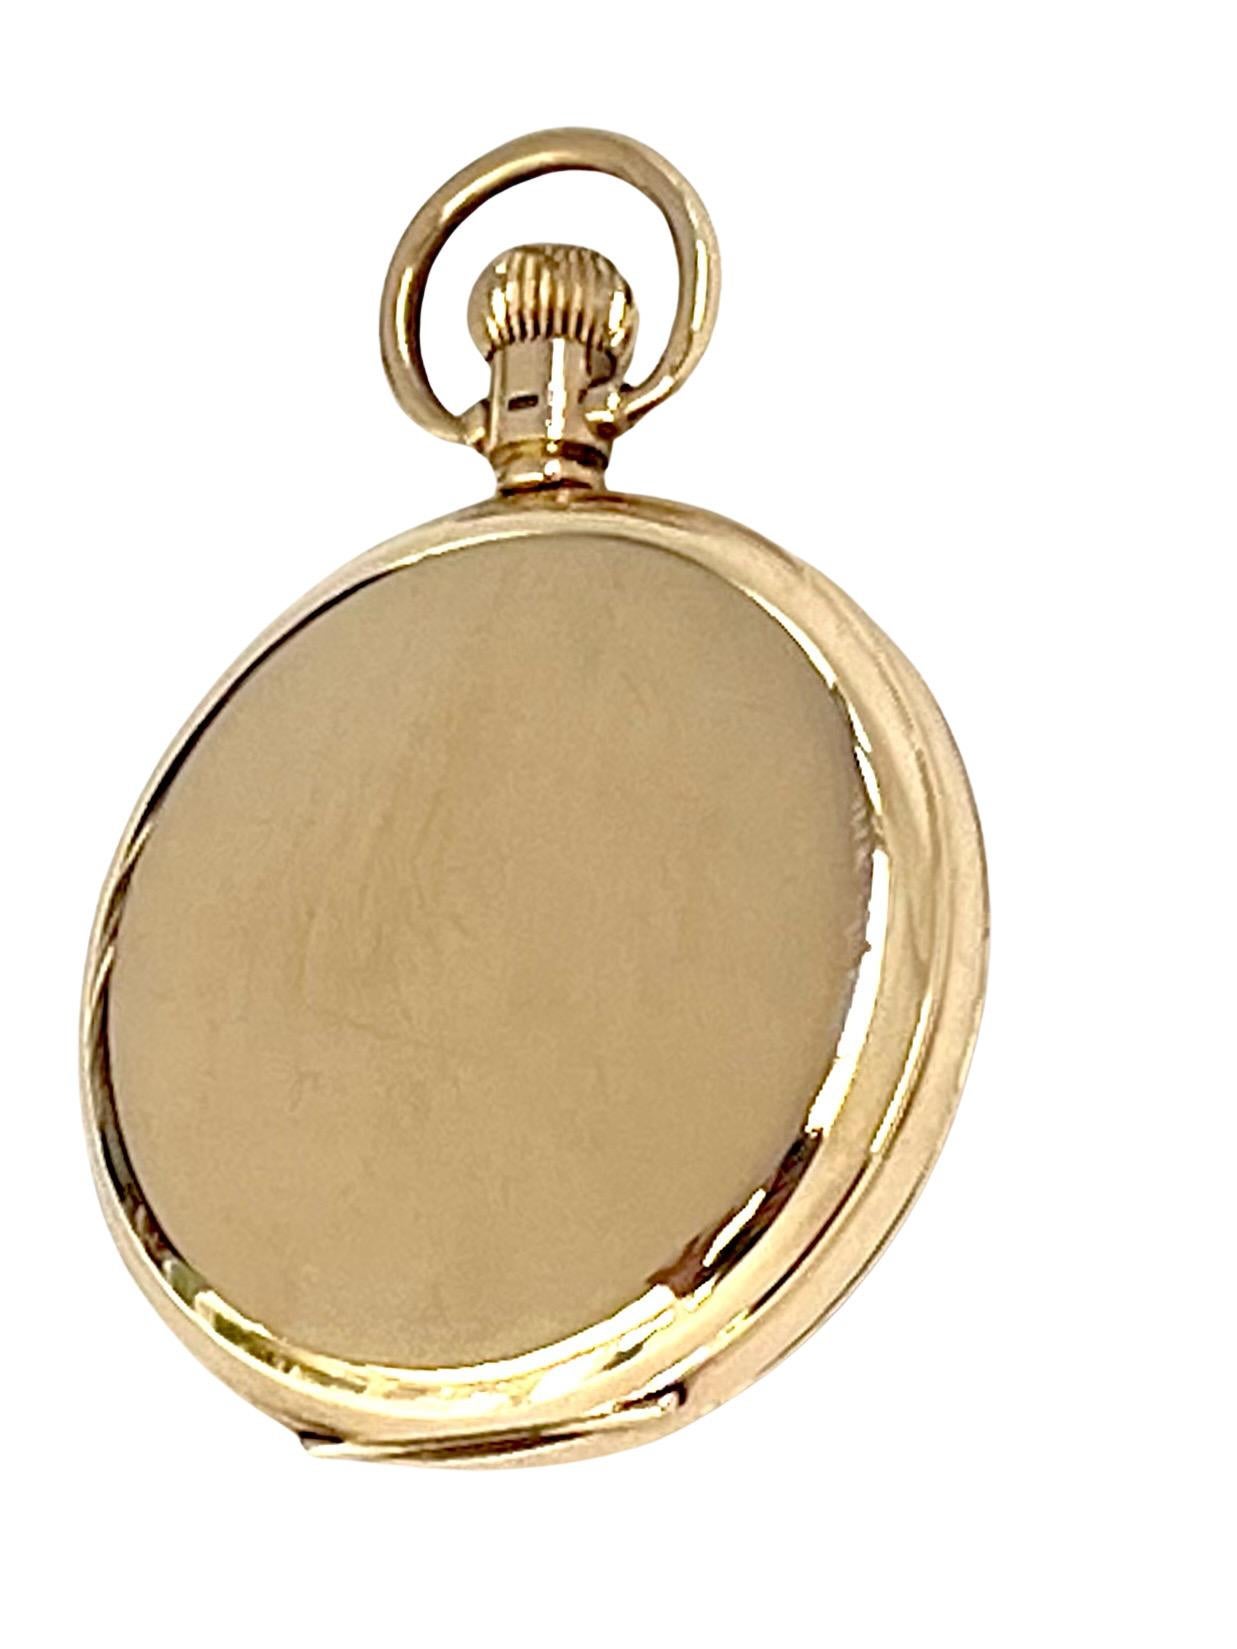 Women's or Men's 9 Carat Solid Gold Open Faced Pocket Watch by Garrard For Sale